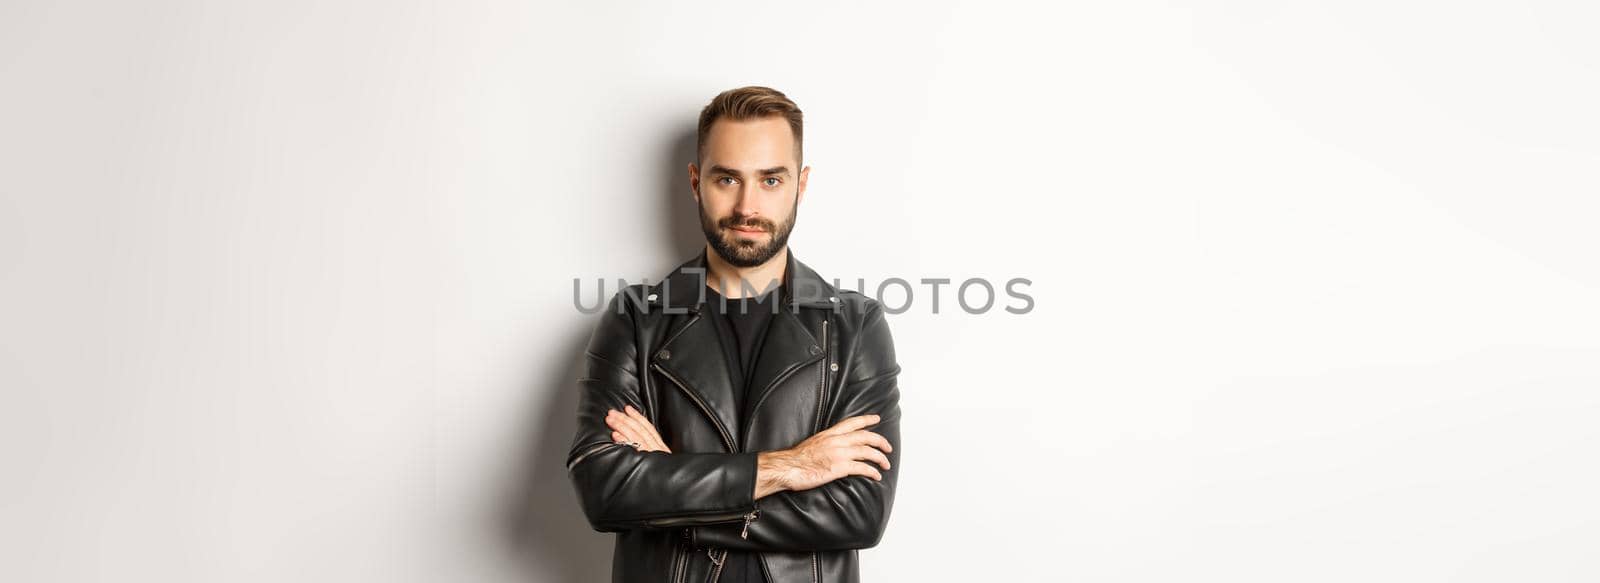 Attractive macho man in leather jacket smiling, looking confident with hands crossed on chest, white background.